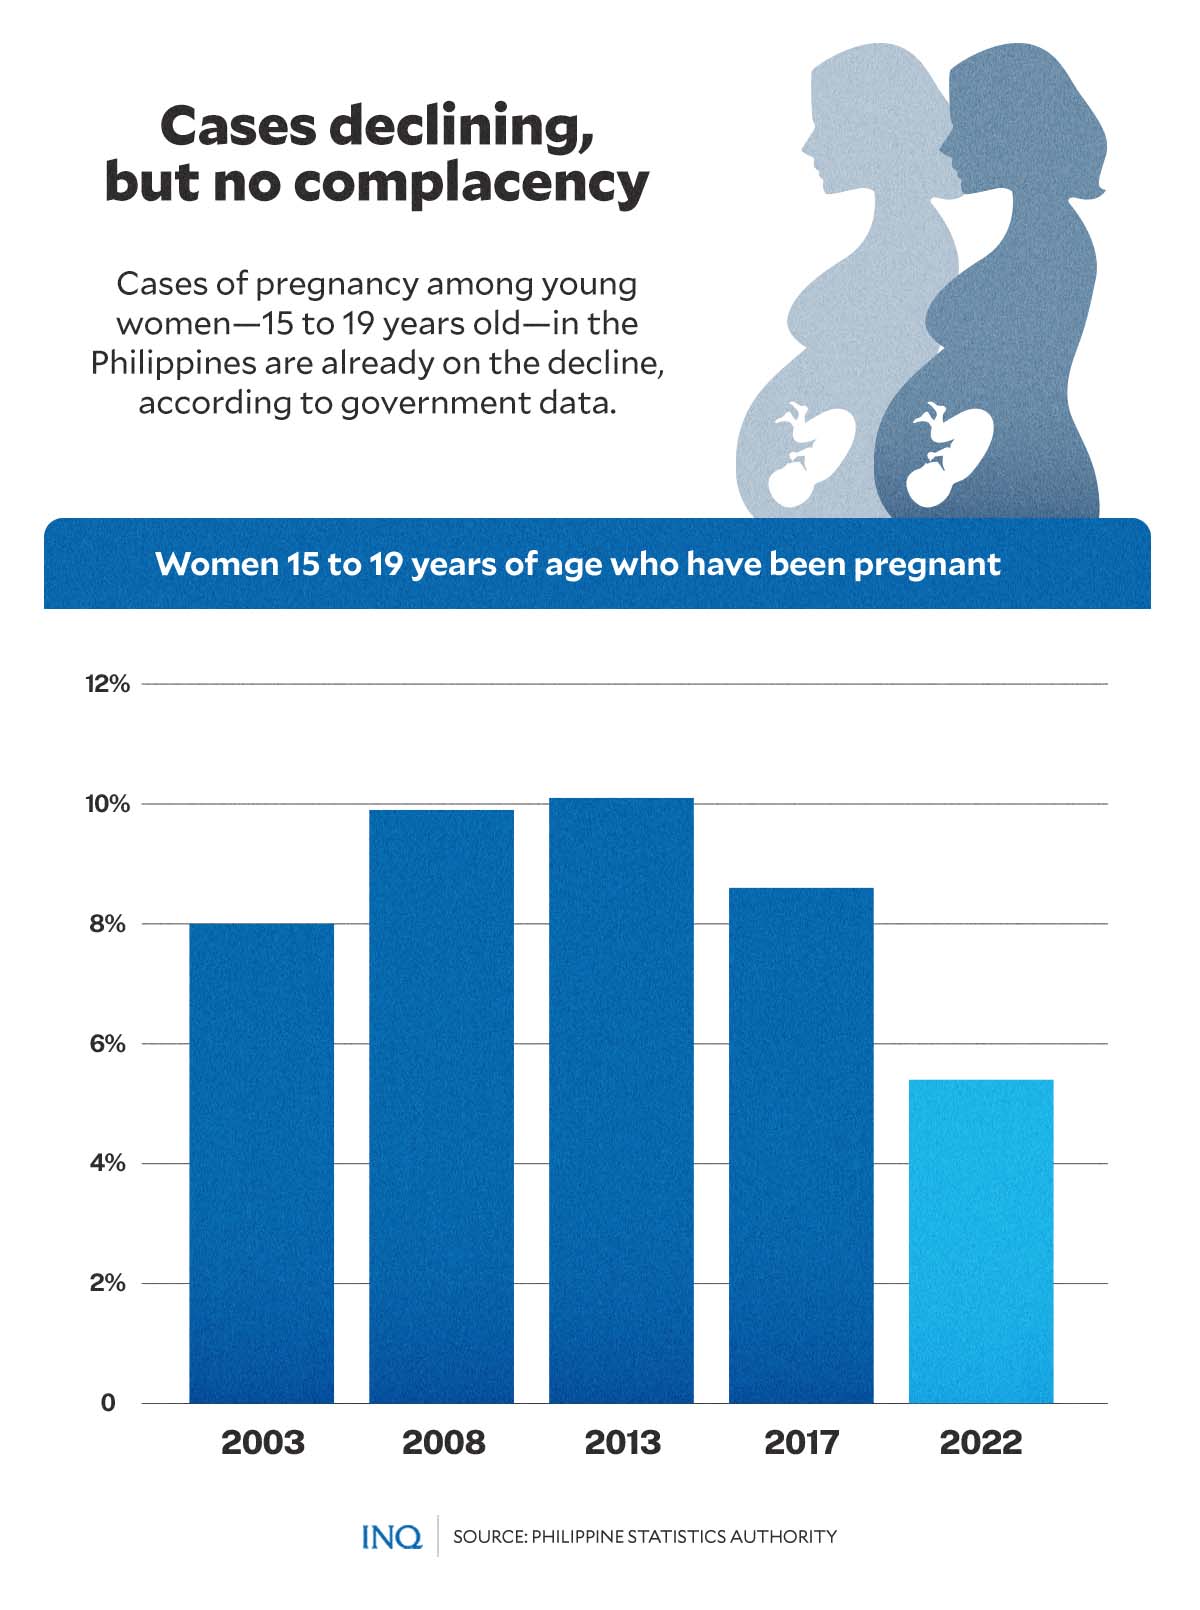 Teenage pregnancies P35B annual PH loss, other costs Inquirer News